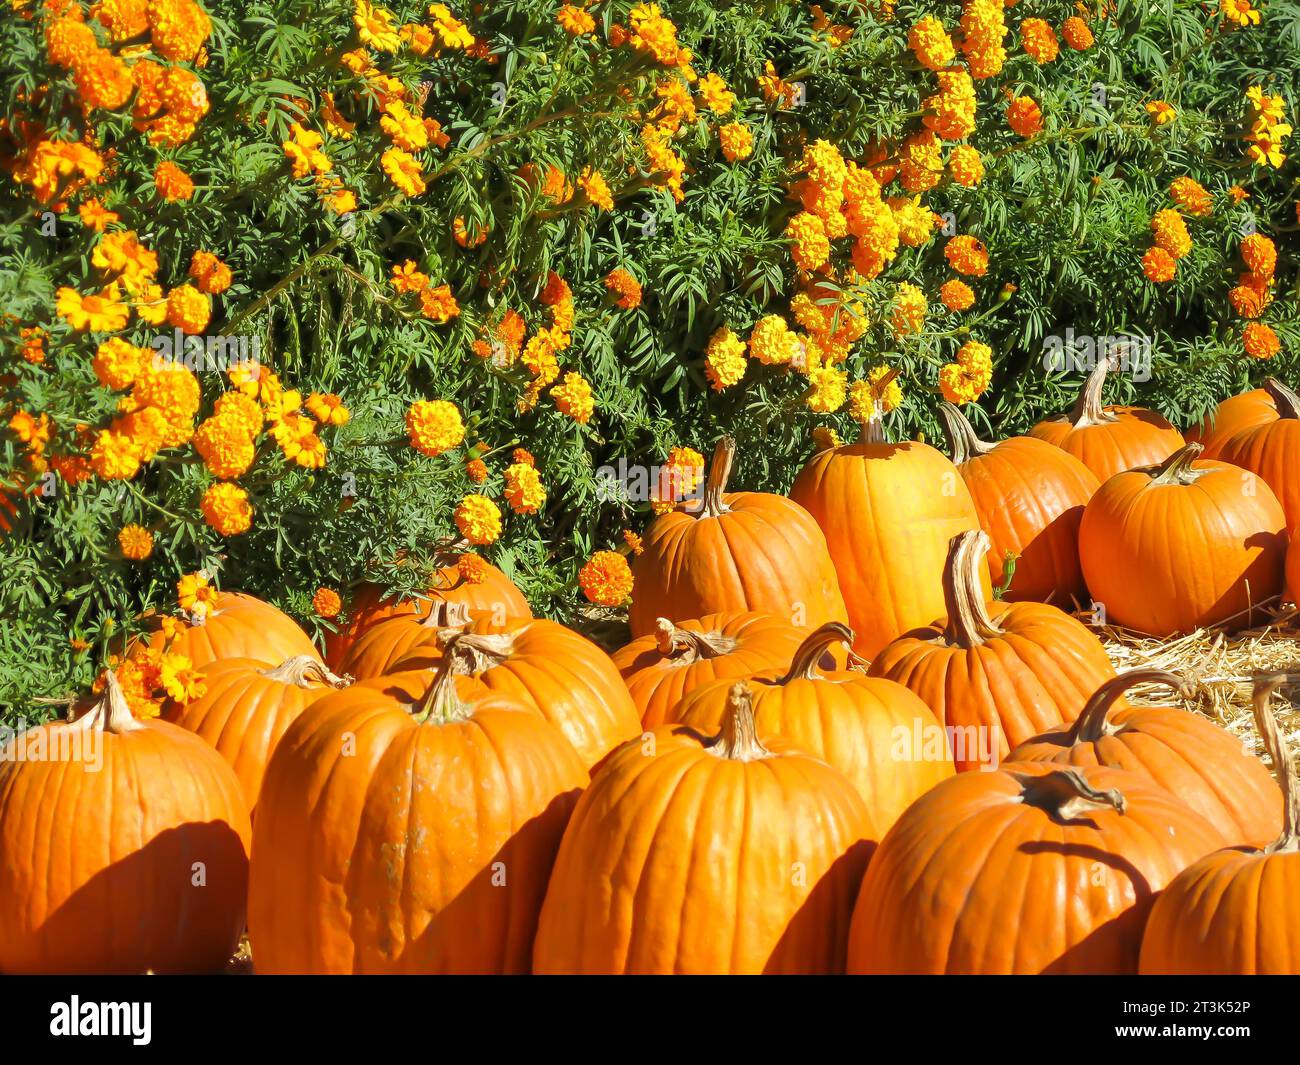 Pumpkins on Display at Base of Flowers Stock Photo